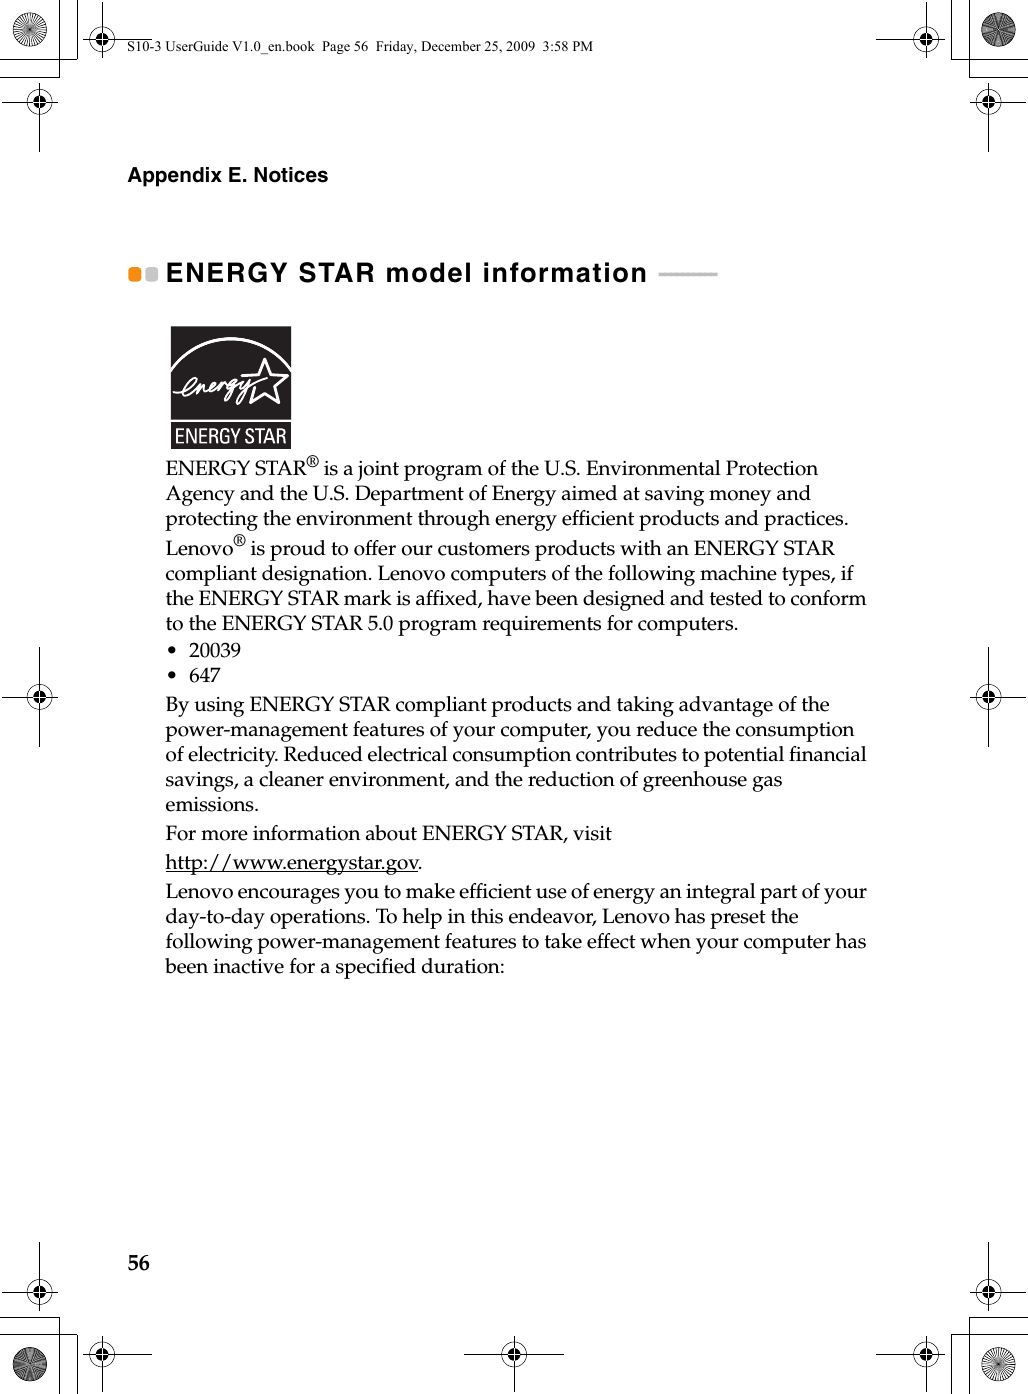 56Appendix E. NoticesENERGY STAR model information  - - - - - - - - - - ENERGY STAR® is a joint program of the U.S. Environmental Protection Agency and the U.S. Department of Energy aimed at saving money and protecting the environment through energy efficient products and practices.Lenovo® is proud to offer our customers products with an ENERGY STAR compliant designation. Lenovo computers of the following machine types, if the ENERGY STAR mark is affixed, have been designed and tested to conform to the ENERGY STAR 5.0 program requirements for computers.• 20039•647By using ENERGY STAR compliant products and taking advantage of the power-management features of your computer, you reduce the consumption of electricity. Reduced electrical consumption contributes to potential financial savings, a cleaner environment, and the reduction of greenhouse gas emissions.For more information about ENERGY STAR, visithttp://www.energystar.gov.Lenovo encourages you to make efficient use of energy an integral part of your day-to-day operations. To help in this endeavor, Lenovo has preset the following power-management features to take effect when your computer has been inactive for a specified duration:S10-3 UserGuide V1.0_en.book  Page 56  Friday, December 25, 2009  3:58 PM